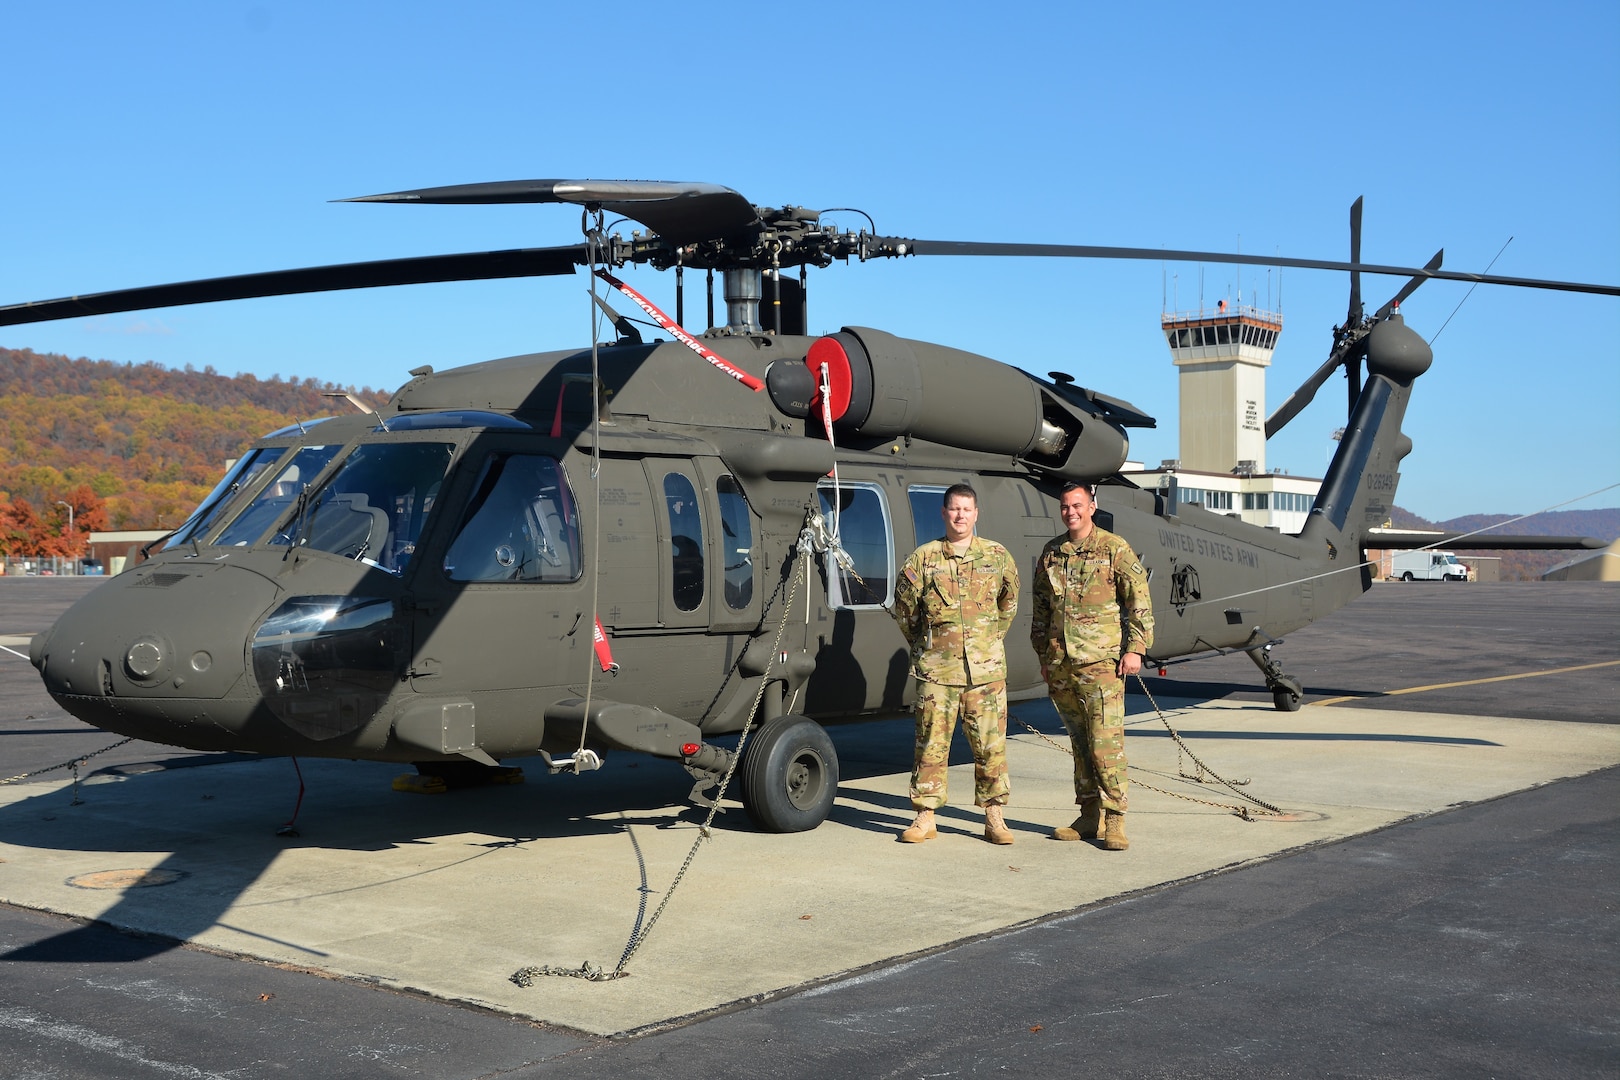 Chief Warrant Officer 4 Frank Madeira, left, and Chief Warrant Officer 4 Justin Meyer, both instructor pilots at the Eastern Army National Guard Aviation Training Site, pose in front of a UH-60V Black Hawk helicopter on Muir Army Airfield at Fort Indiantown Gap, Pa., Nov. 10, 2021.